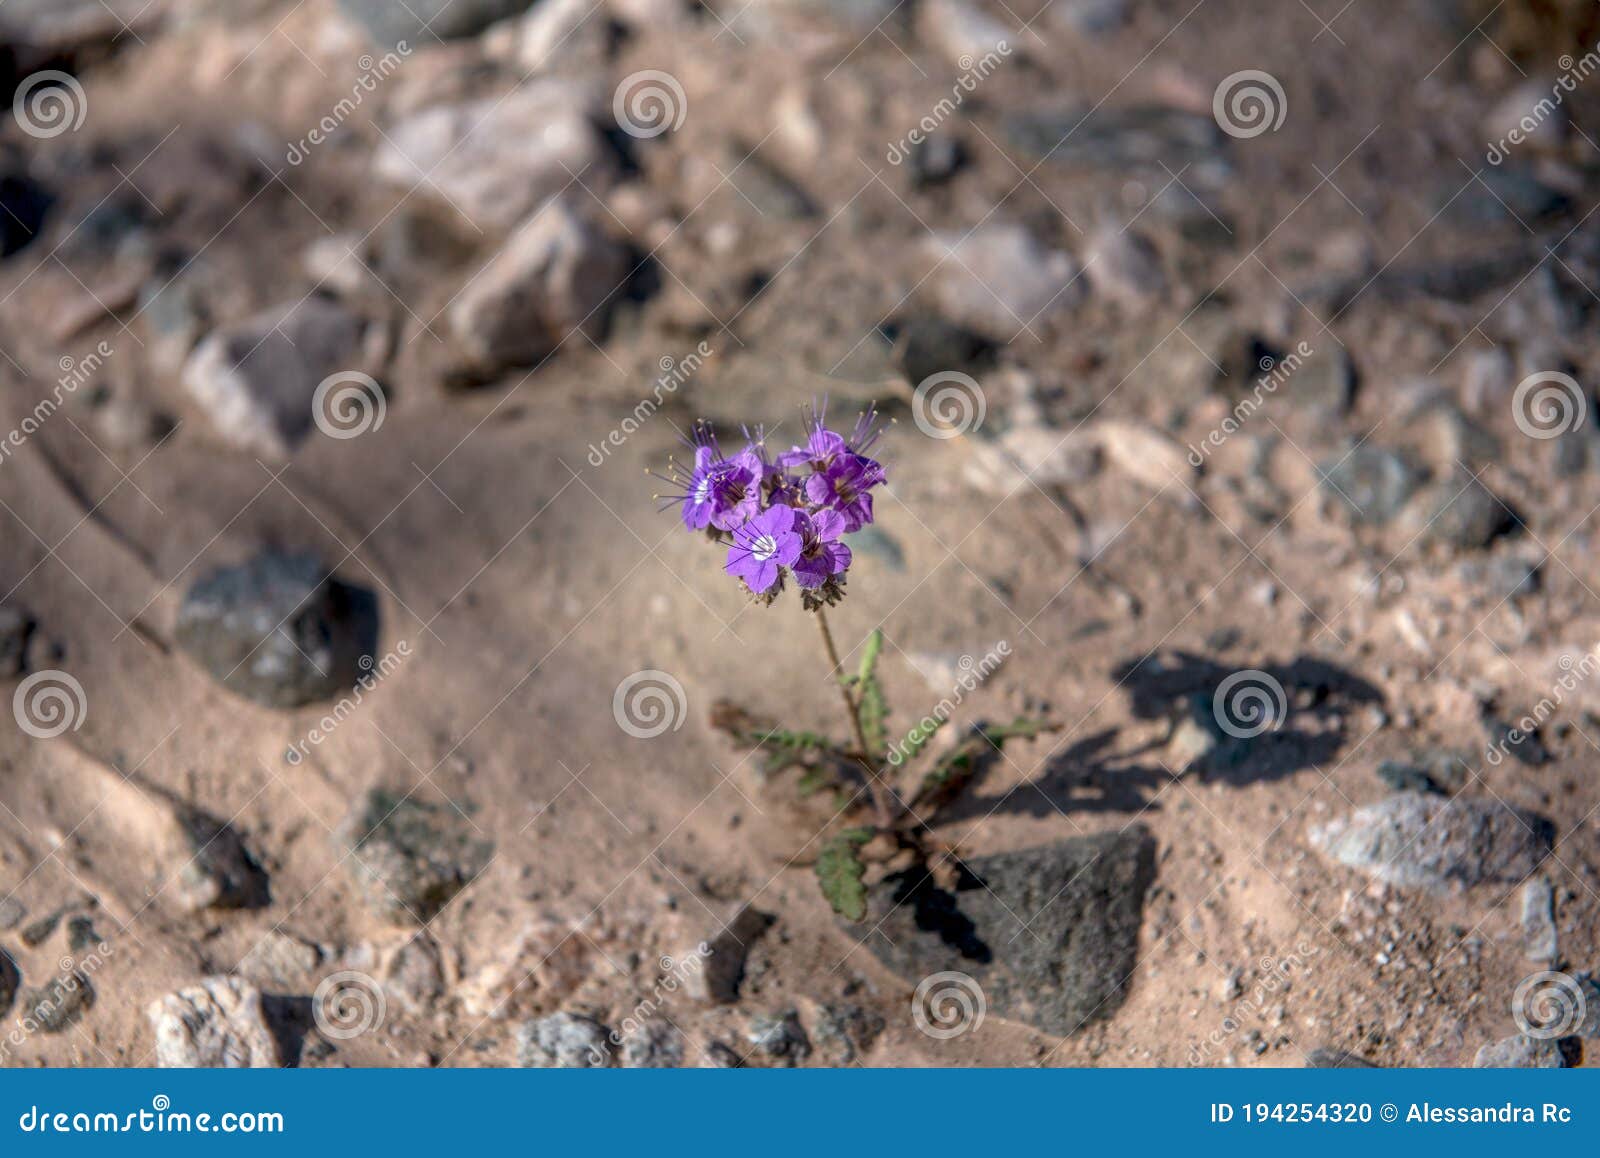 phacelia fremontii, purple, in the desert of southern california